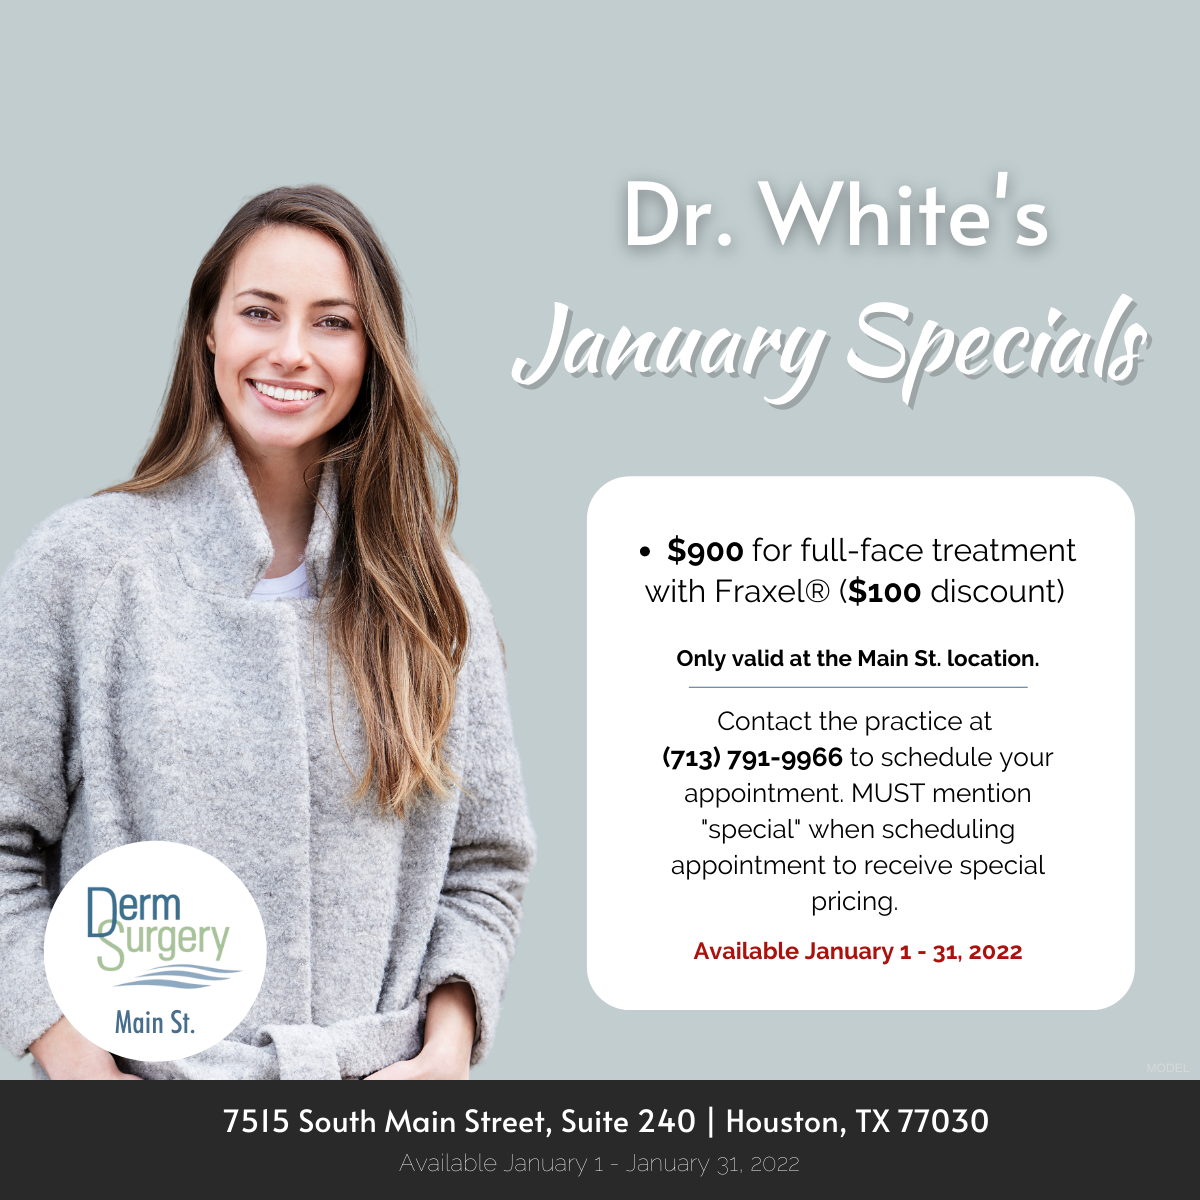 Dr. White's January Specials